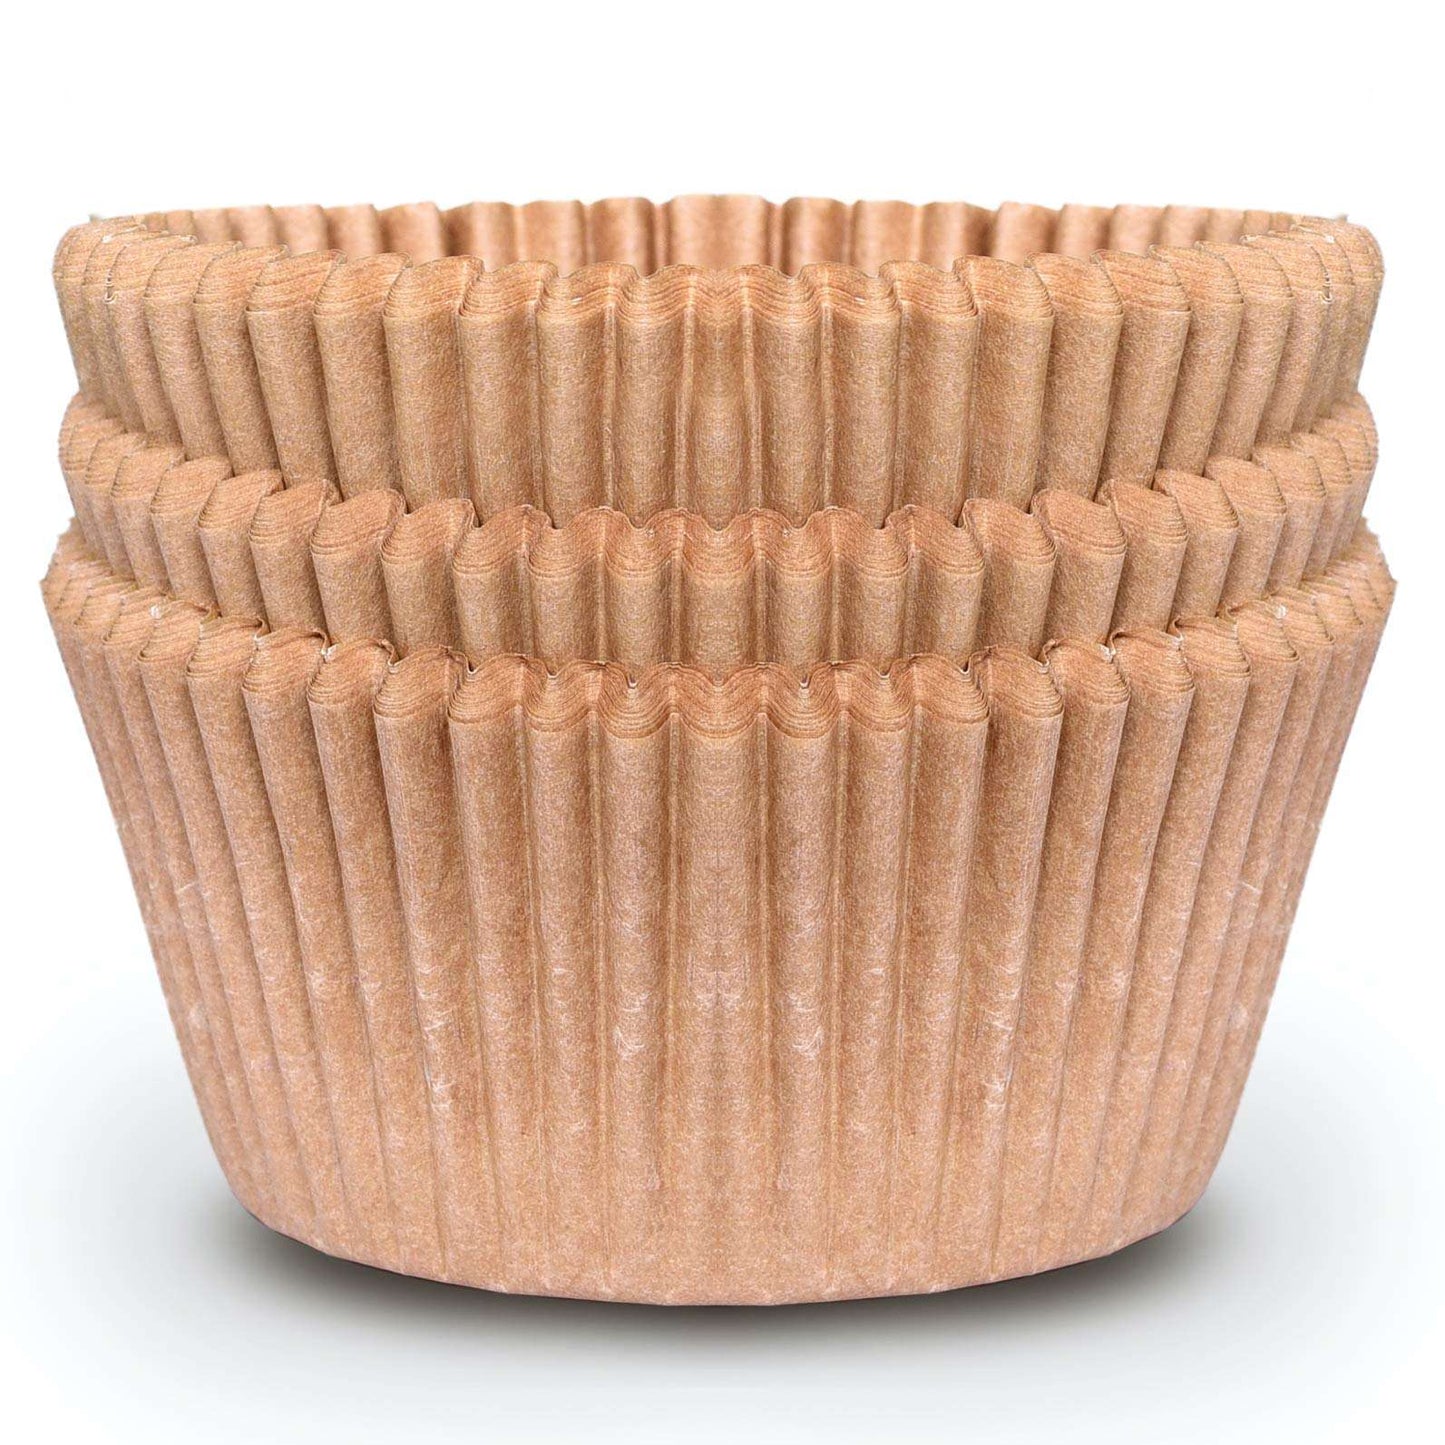 600 Pcs Jumbo Cupcake Liners Baking Cups Brown Odorless Muffin Liners for  Baking(Large Size) 